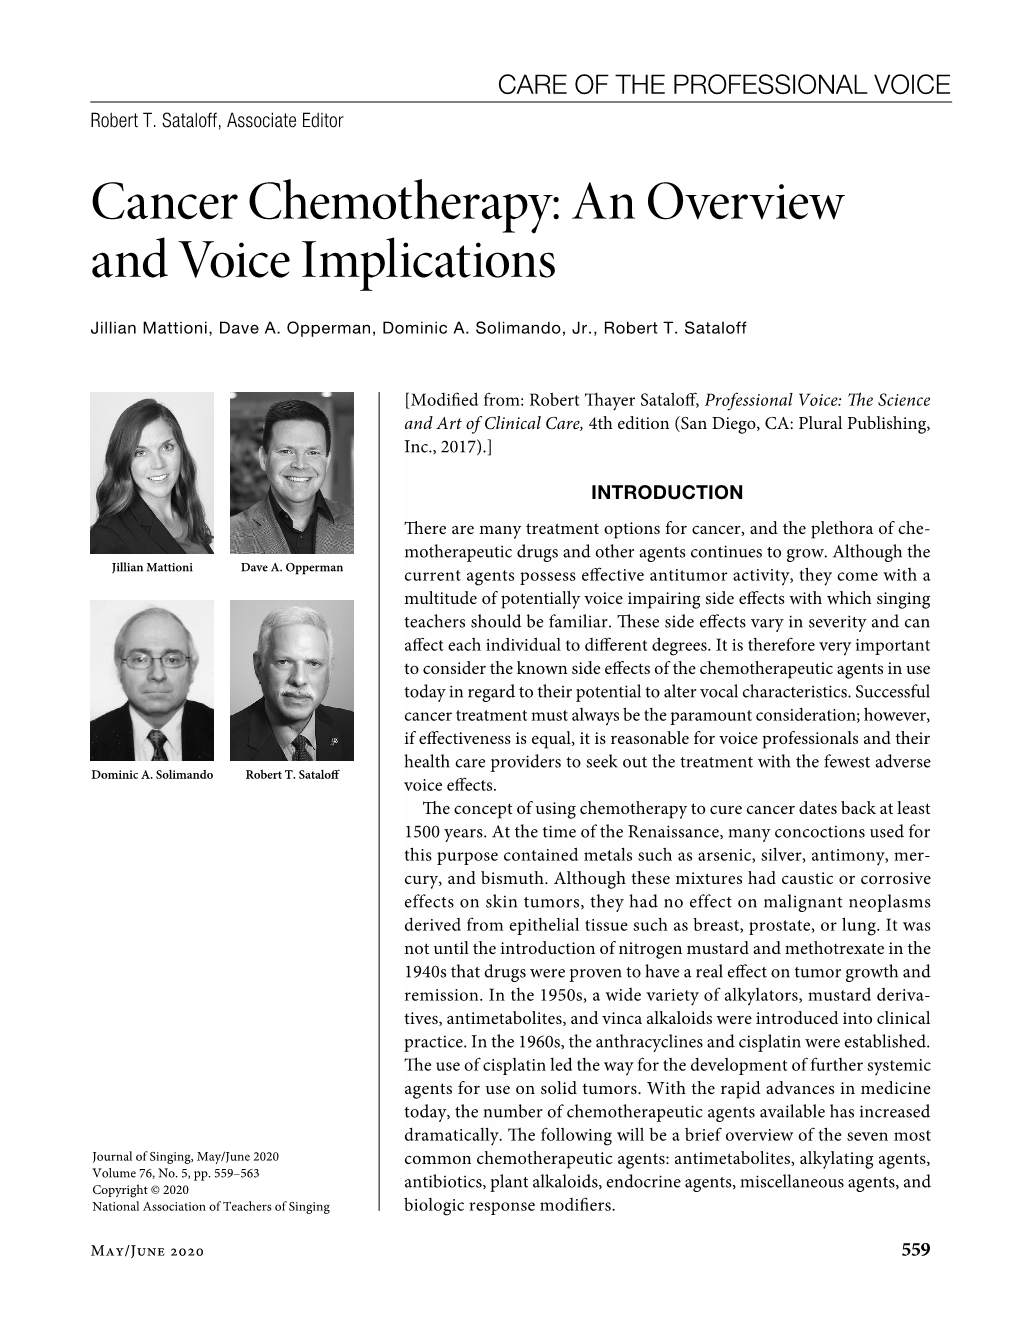 Cancer Chemotherapy: an Overview and Voice Implications